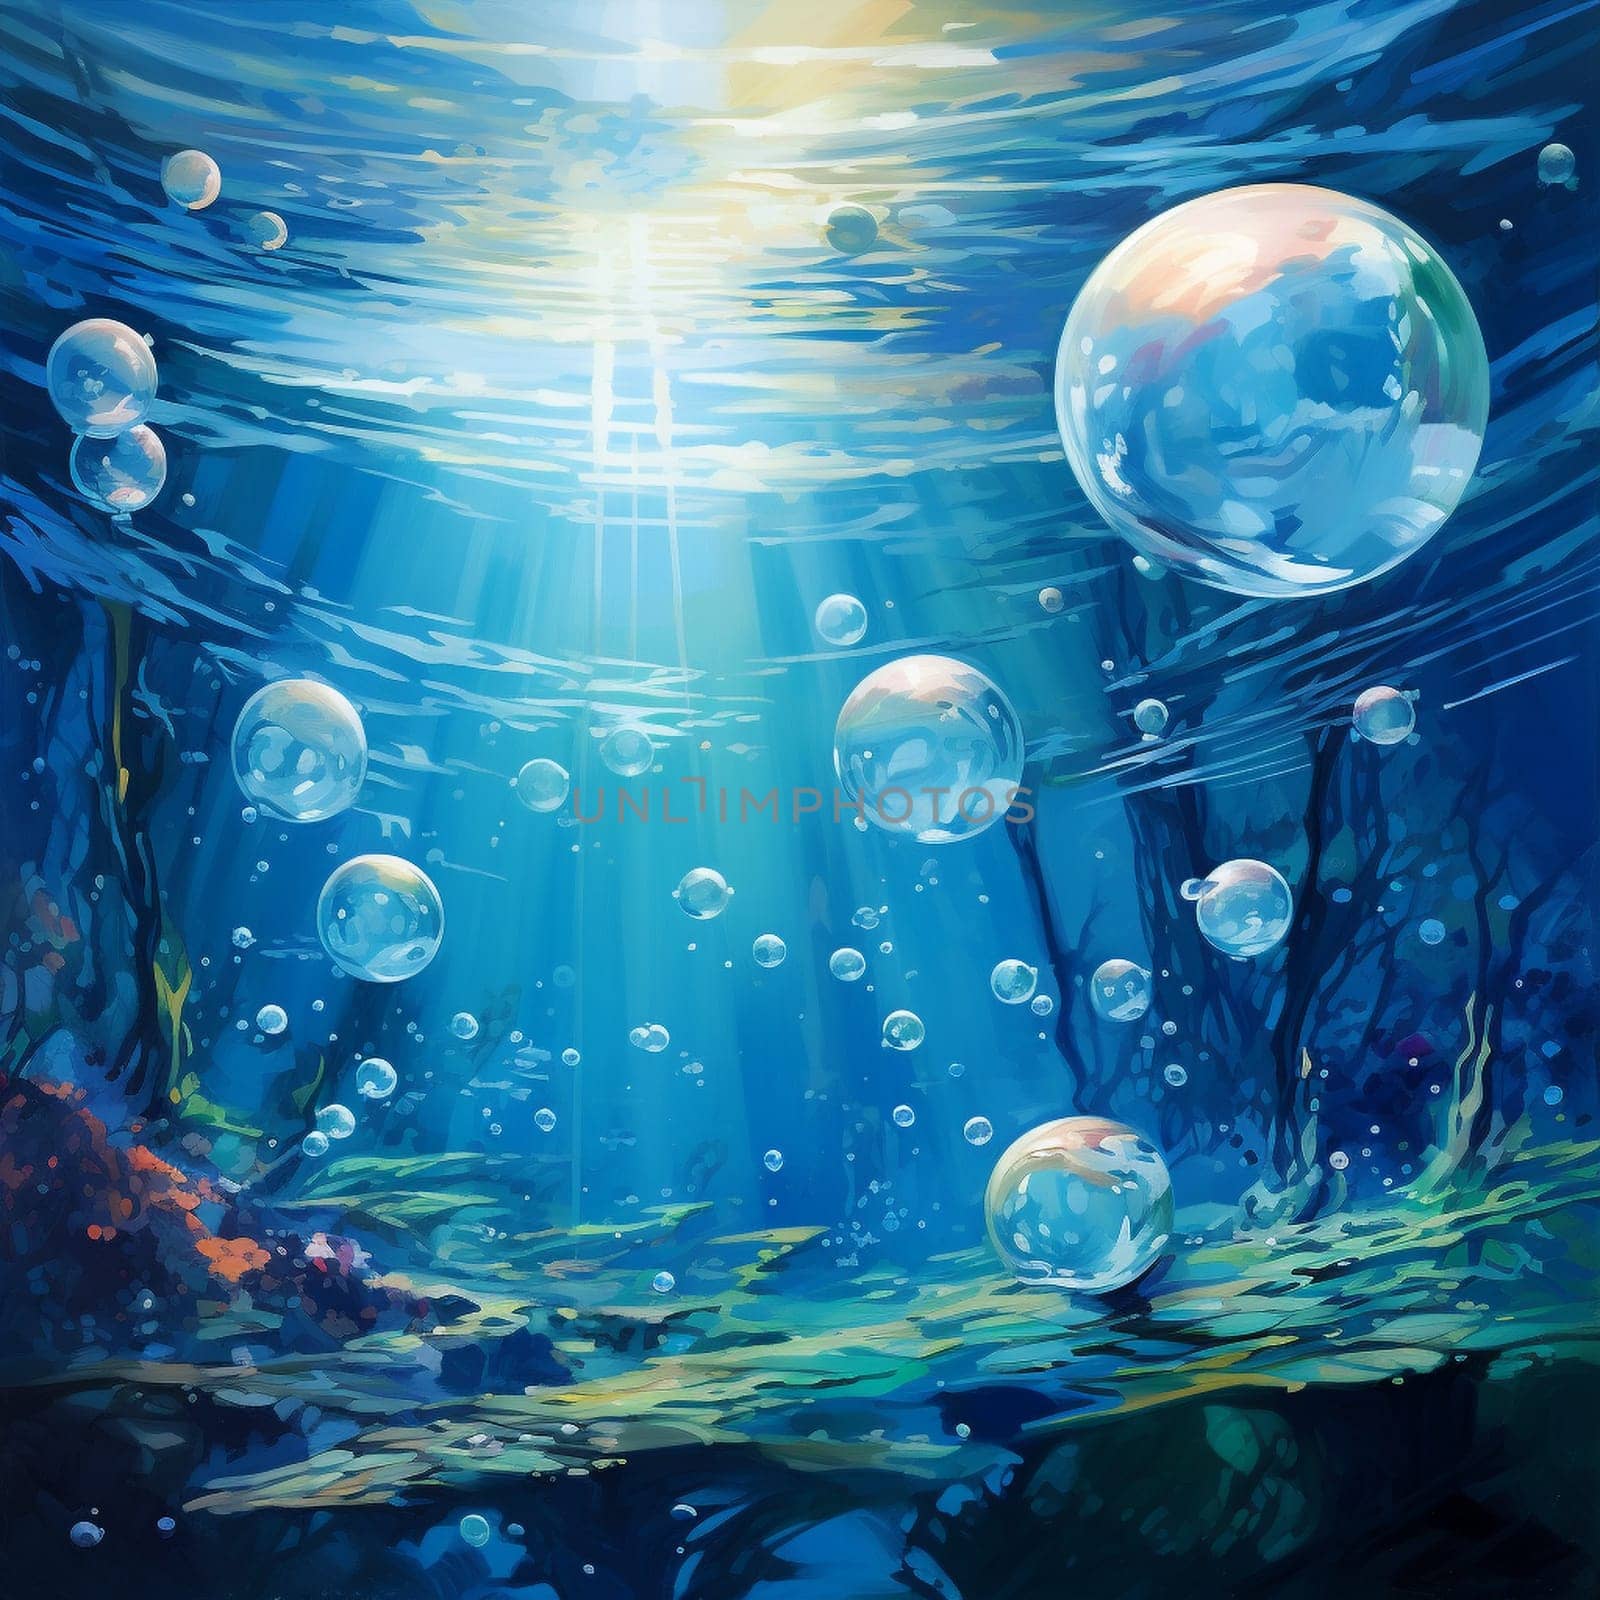 Immerse yourself in the enchanting beauty of this underwater scene, featuring multiple transparent spheres gracefully floating in a vast expanse of shimmering blue water. The spheres reflect the vibrant colors of the surrounding environment, creating a mesmerizing and ethereal visual effect. The deep blue water is adorned with subtle ripples that catch and reflect the gentle sunlight, infusing the scene with a sense of tranquility and mystery. Journey into your imagination and explore the captivating allure of the aquatic world with this breathtaking image.